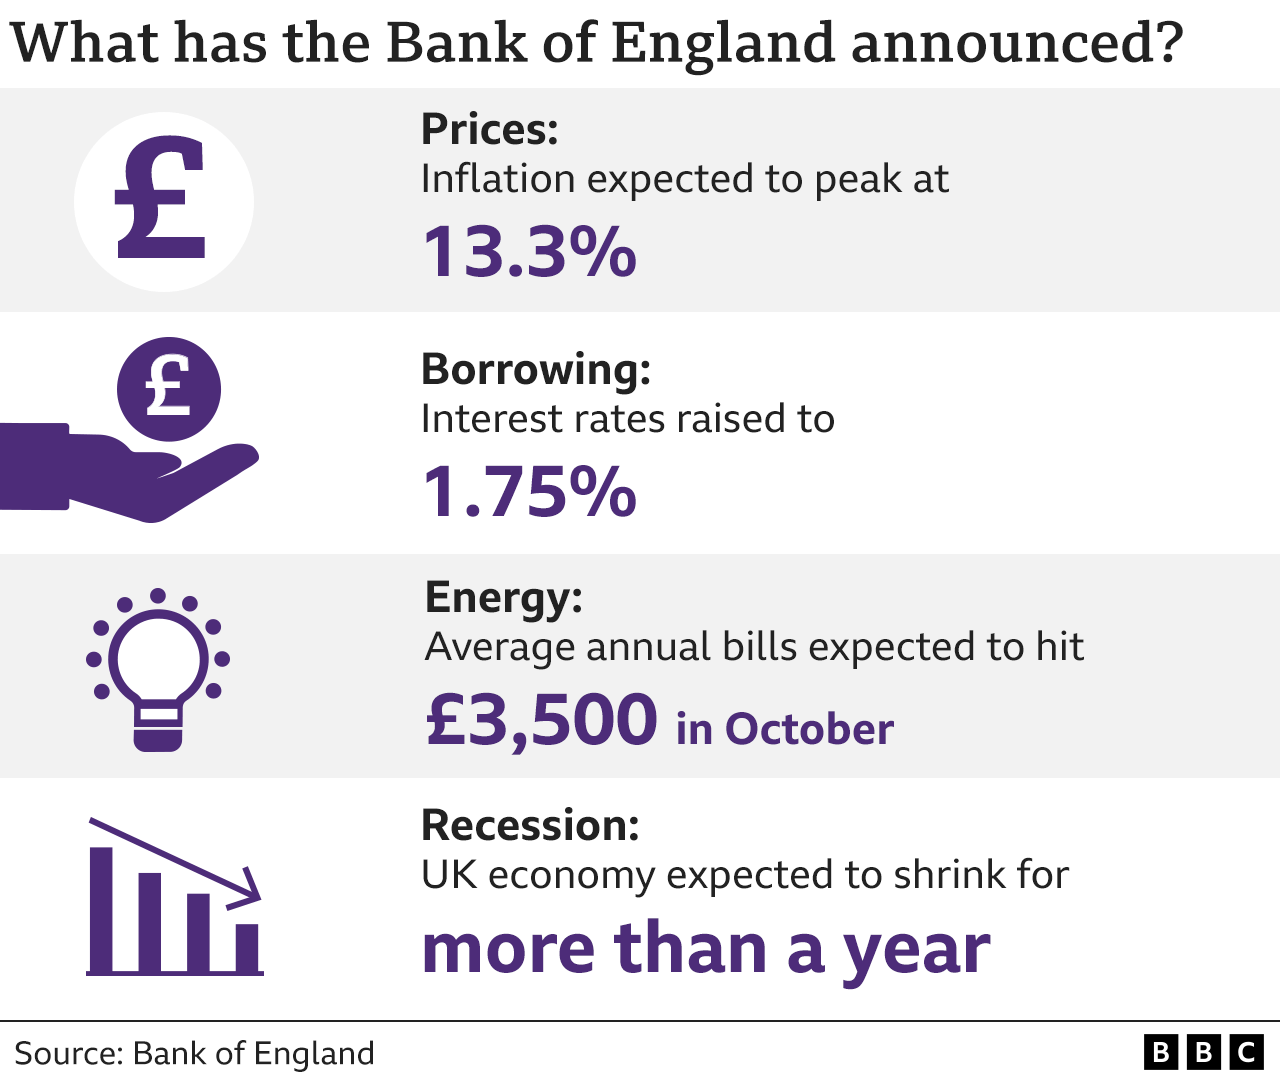 Graphic on what the Bank of England has announced